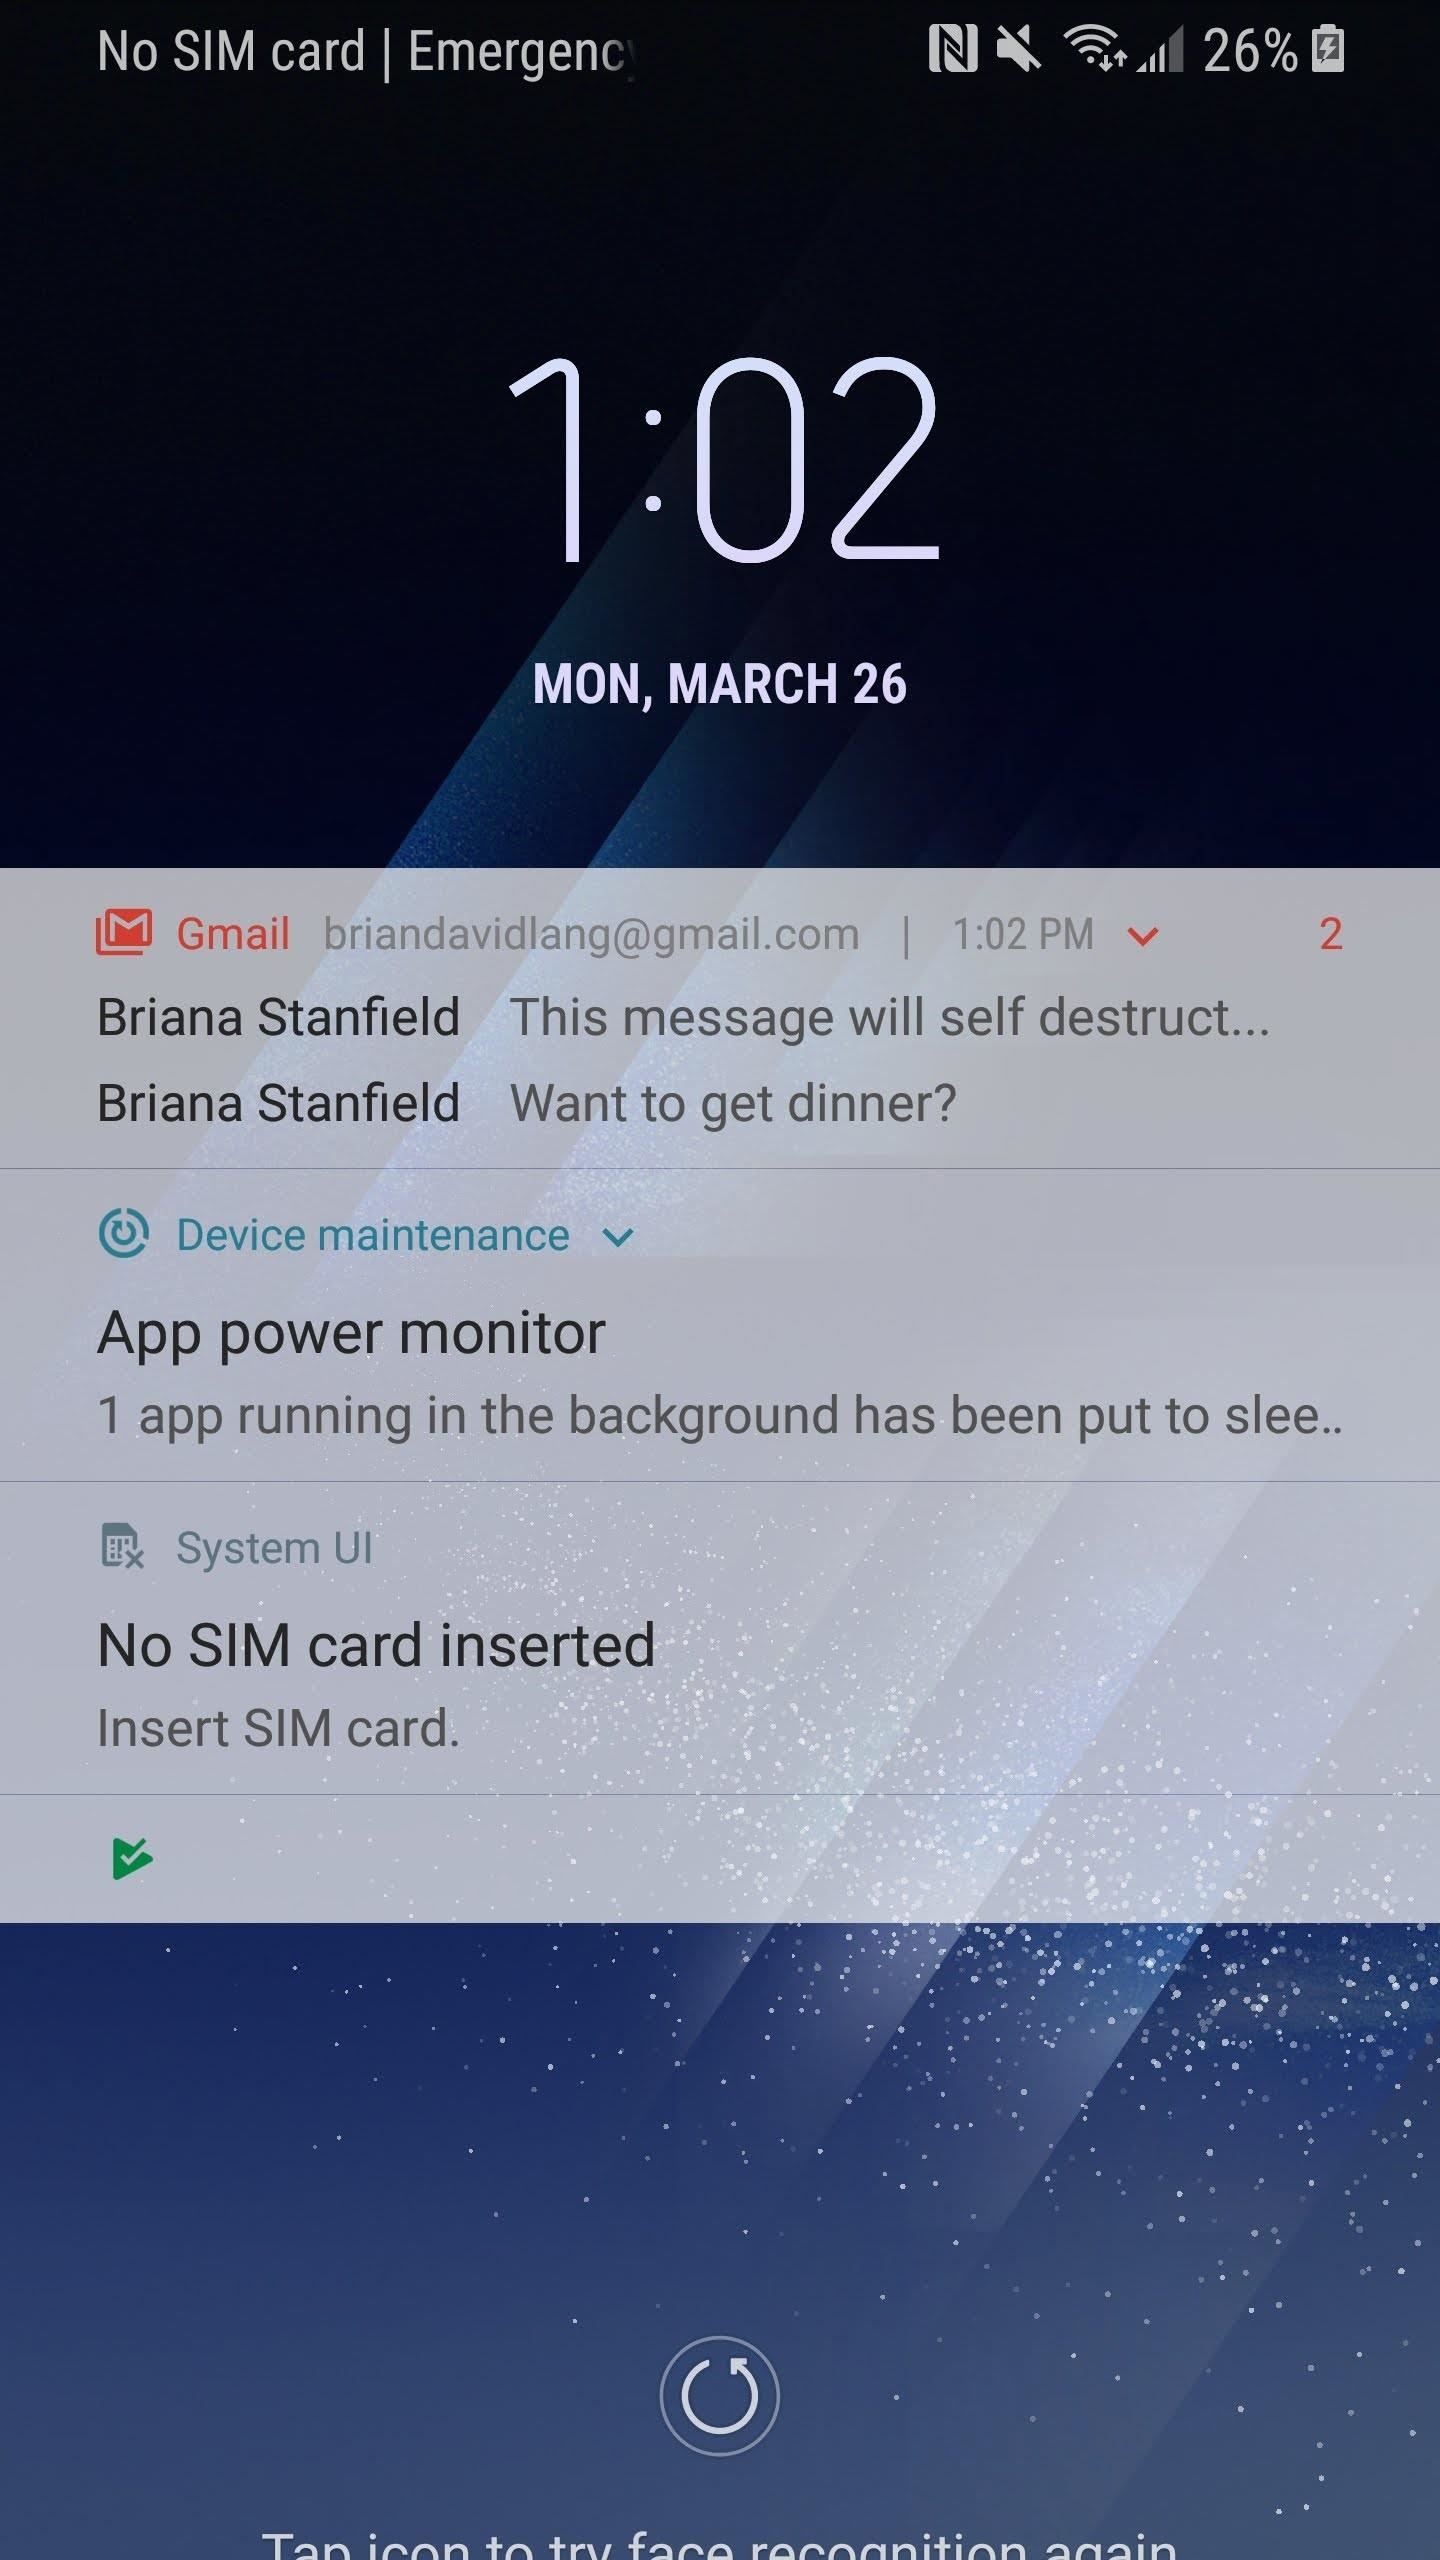 Here's Why Notifications Are the Best Galaxy S9 Feature When Compared to iPhones